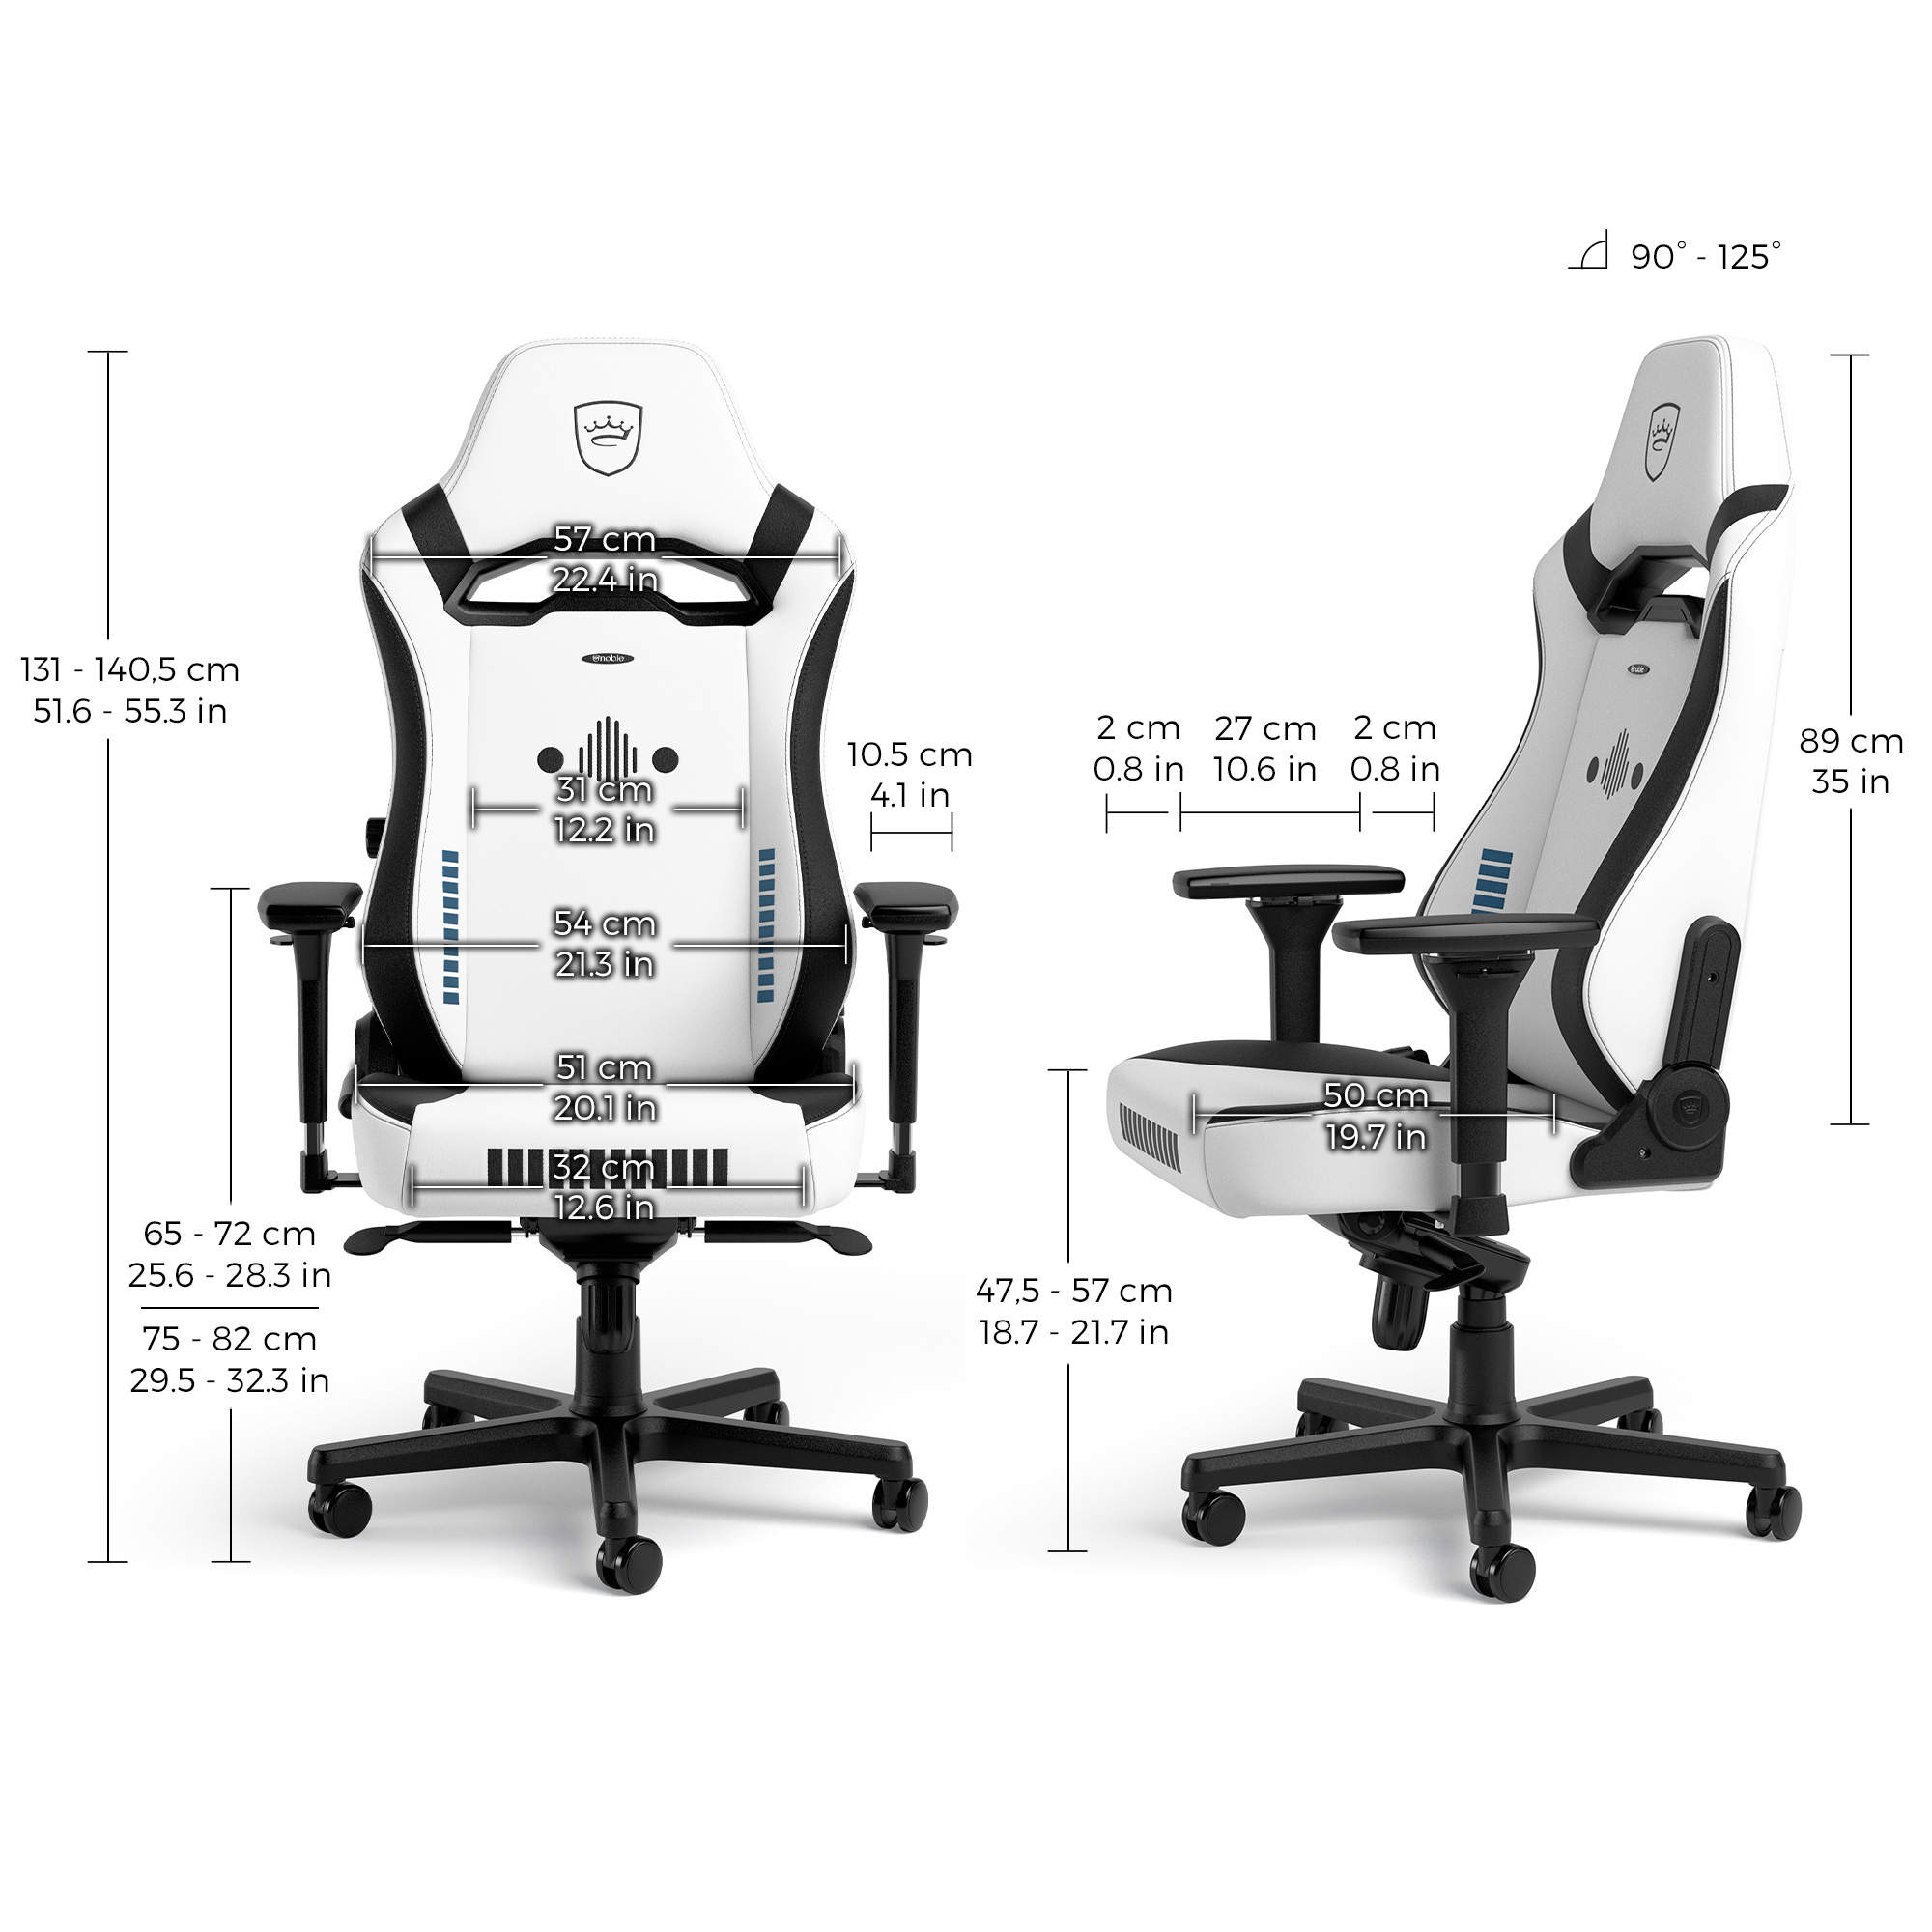 noblechairs - noblechairs HERO ST Gaming Chair Stormtrooper Edition